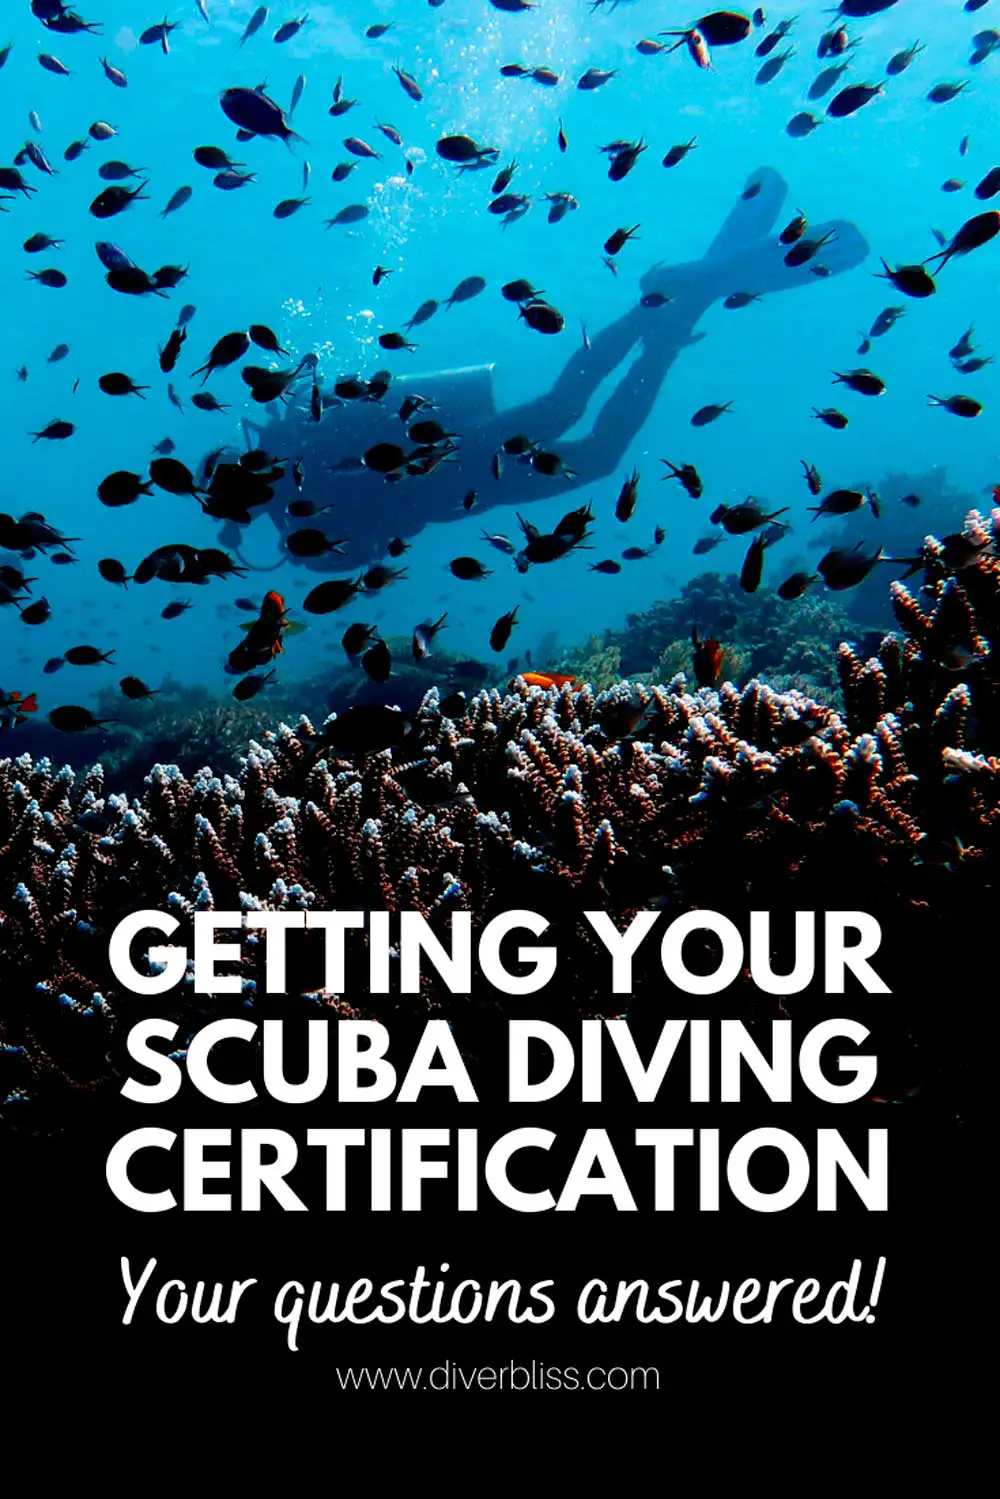 Getting your scuba diving certification, your questions answered! 